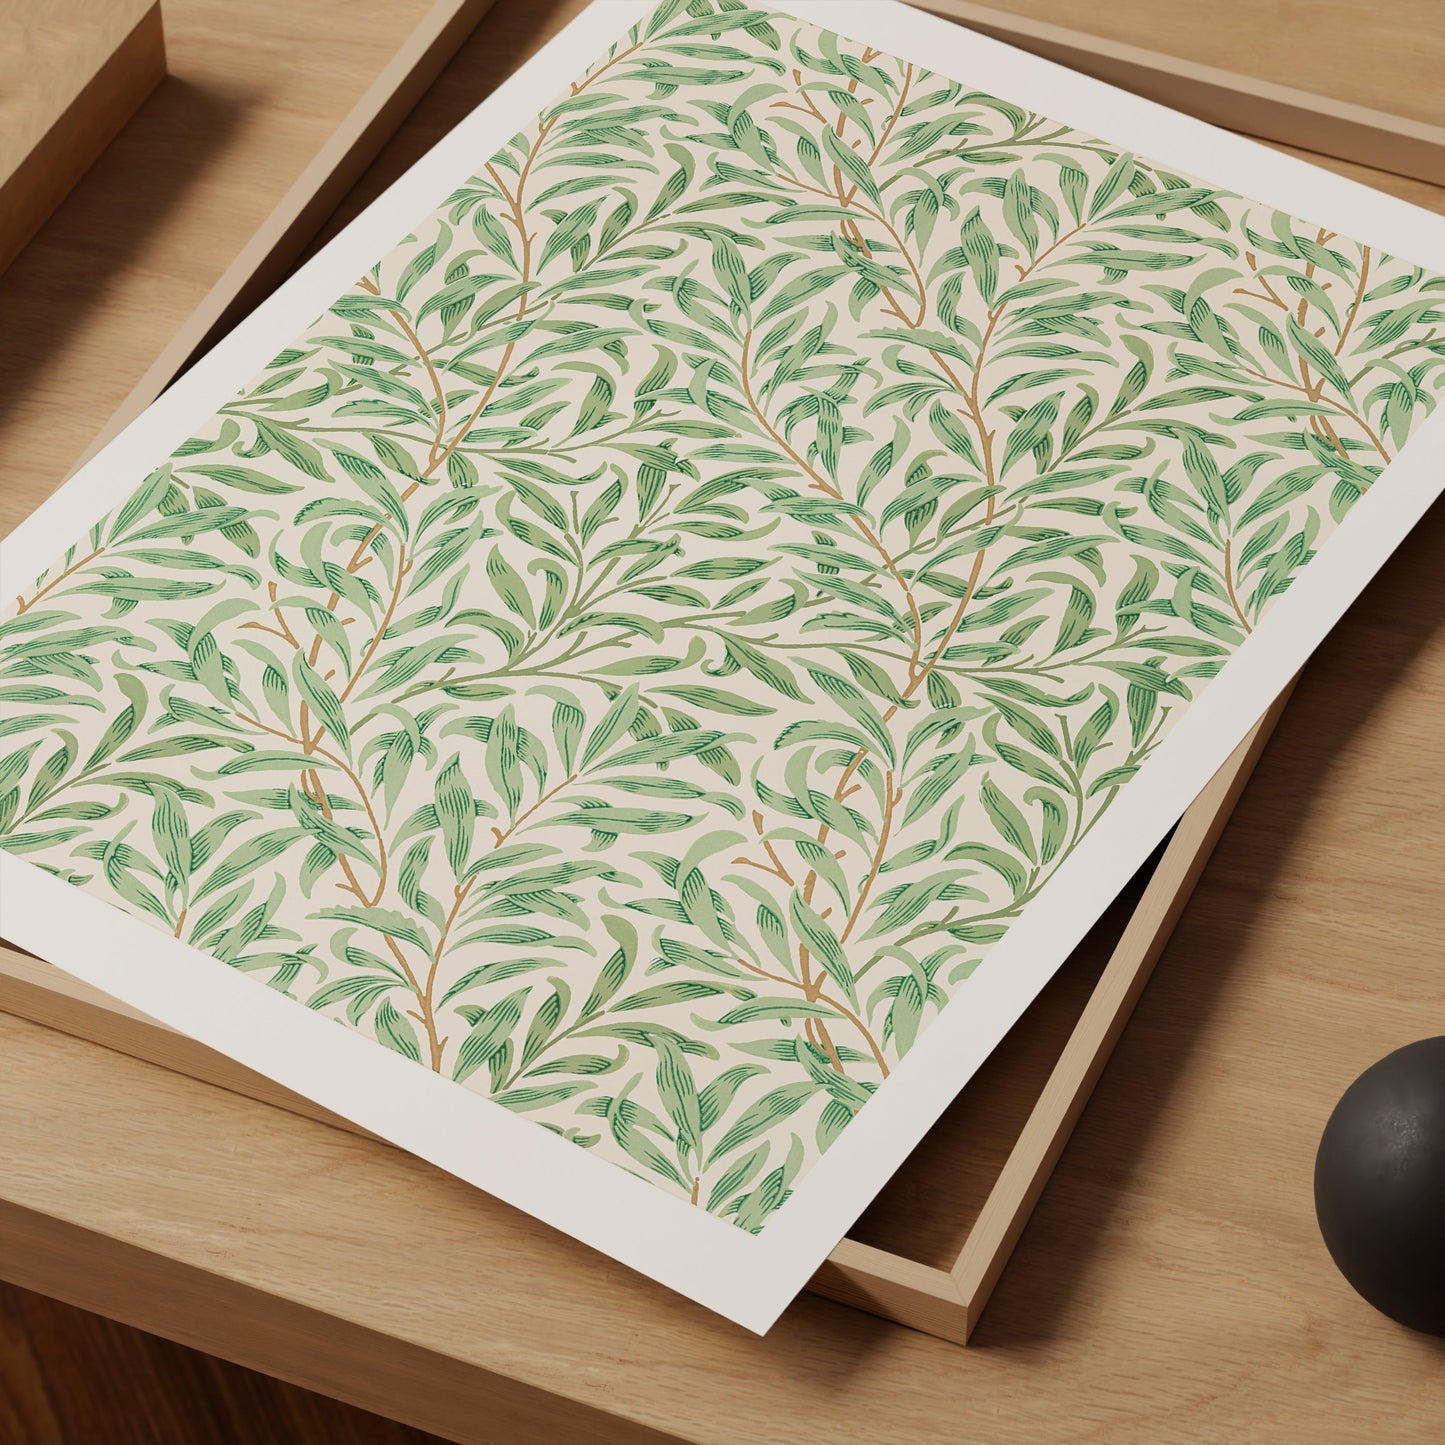 a picture of a green leafy pattern on a piece of paper